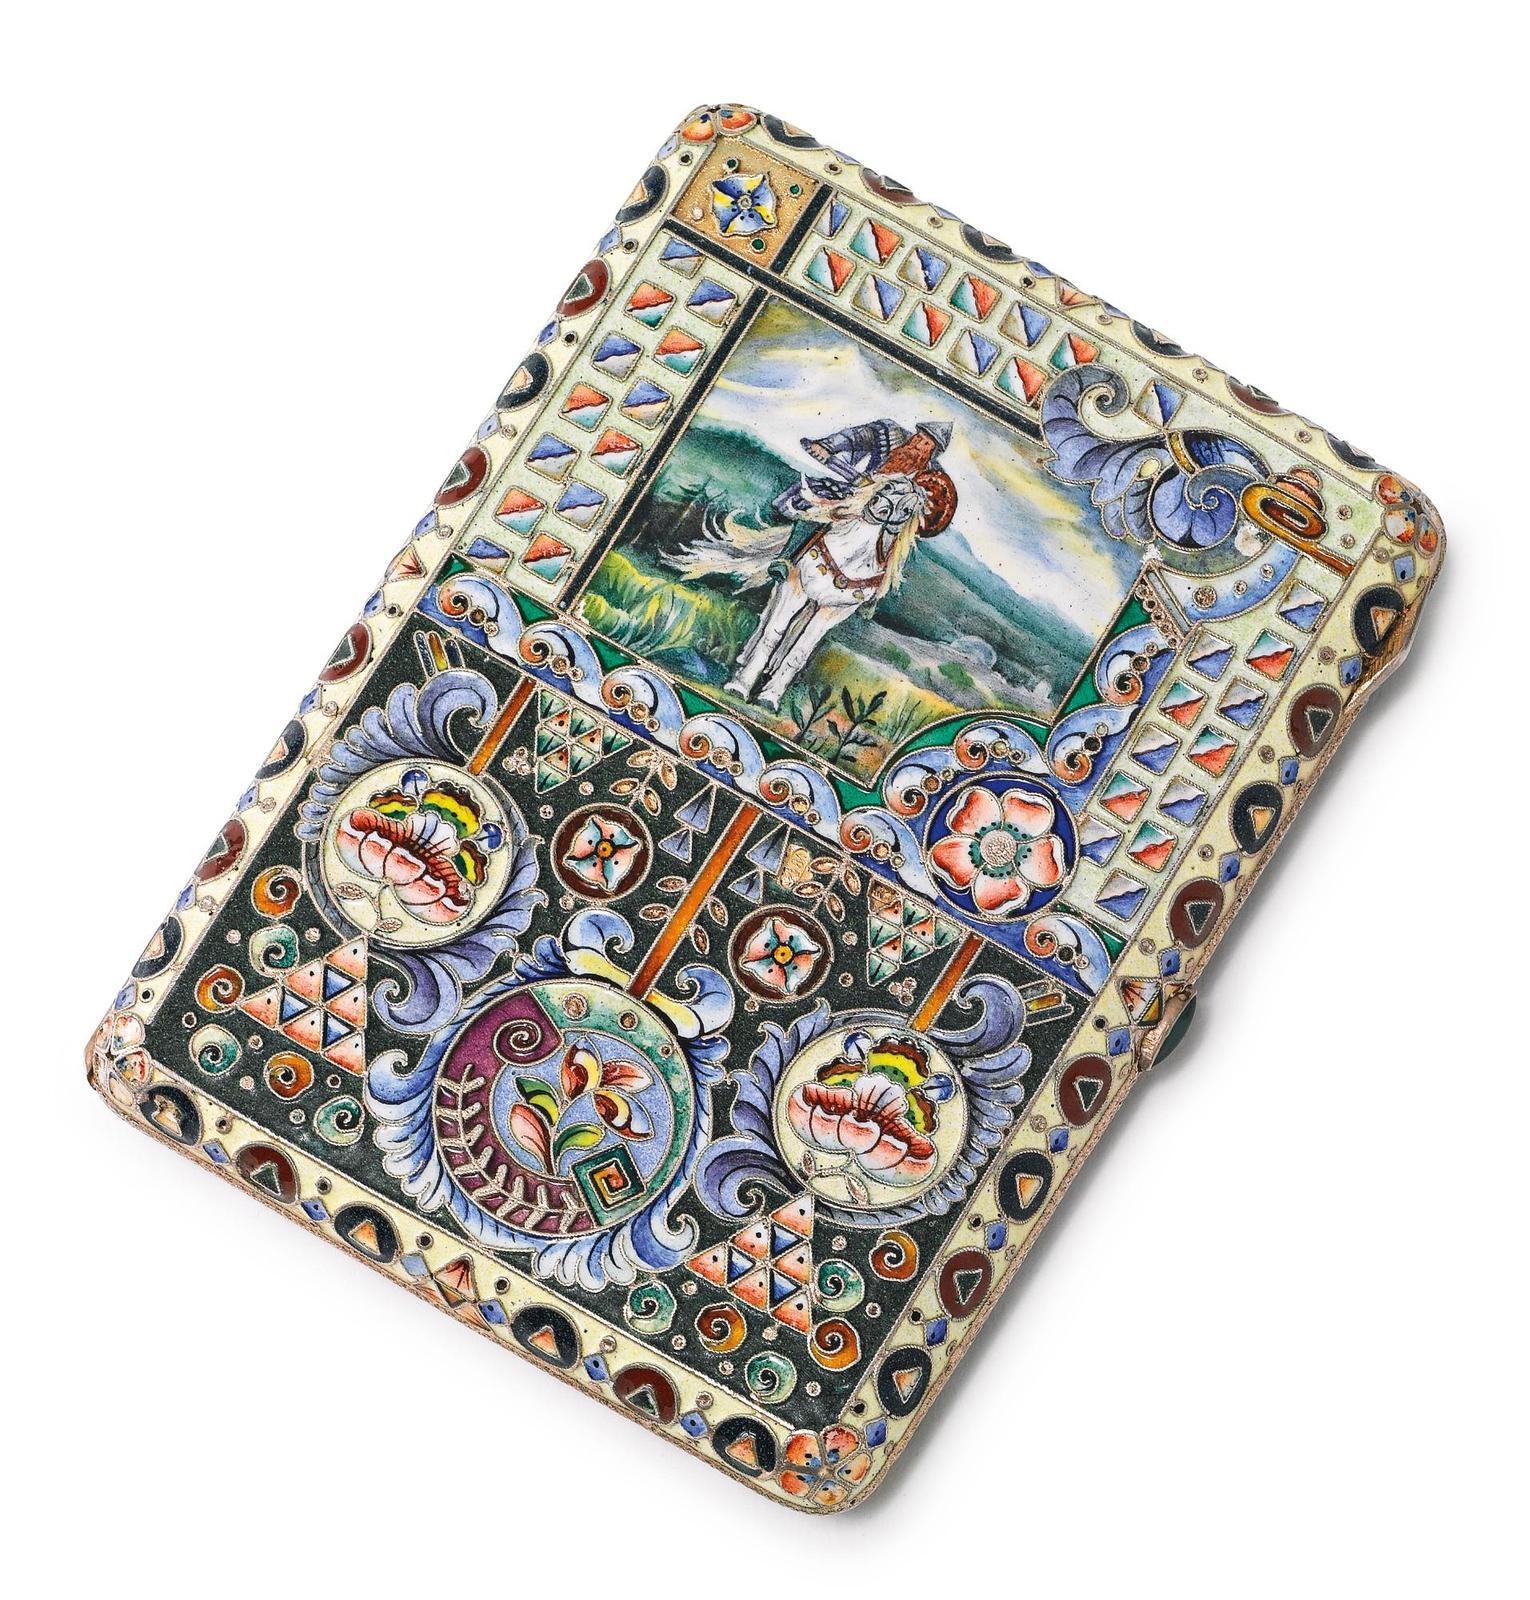 A RUSSIAN GILDED SILVER, SHADED AND PICTORIAL ENAMEL CIGARETTE CASE, KONSTANT...